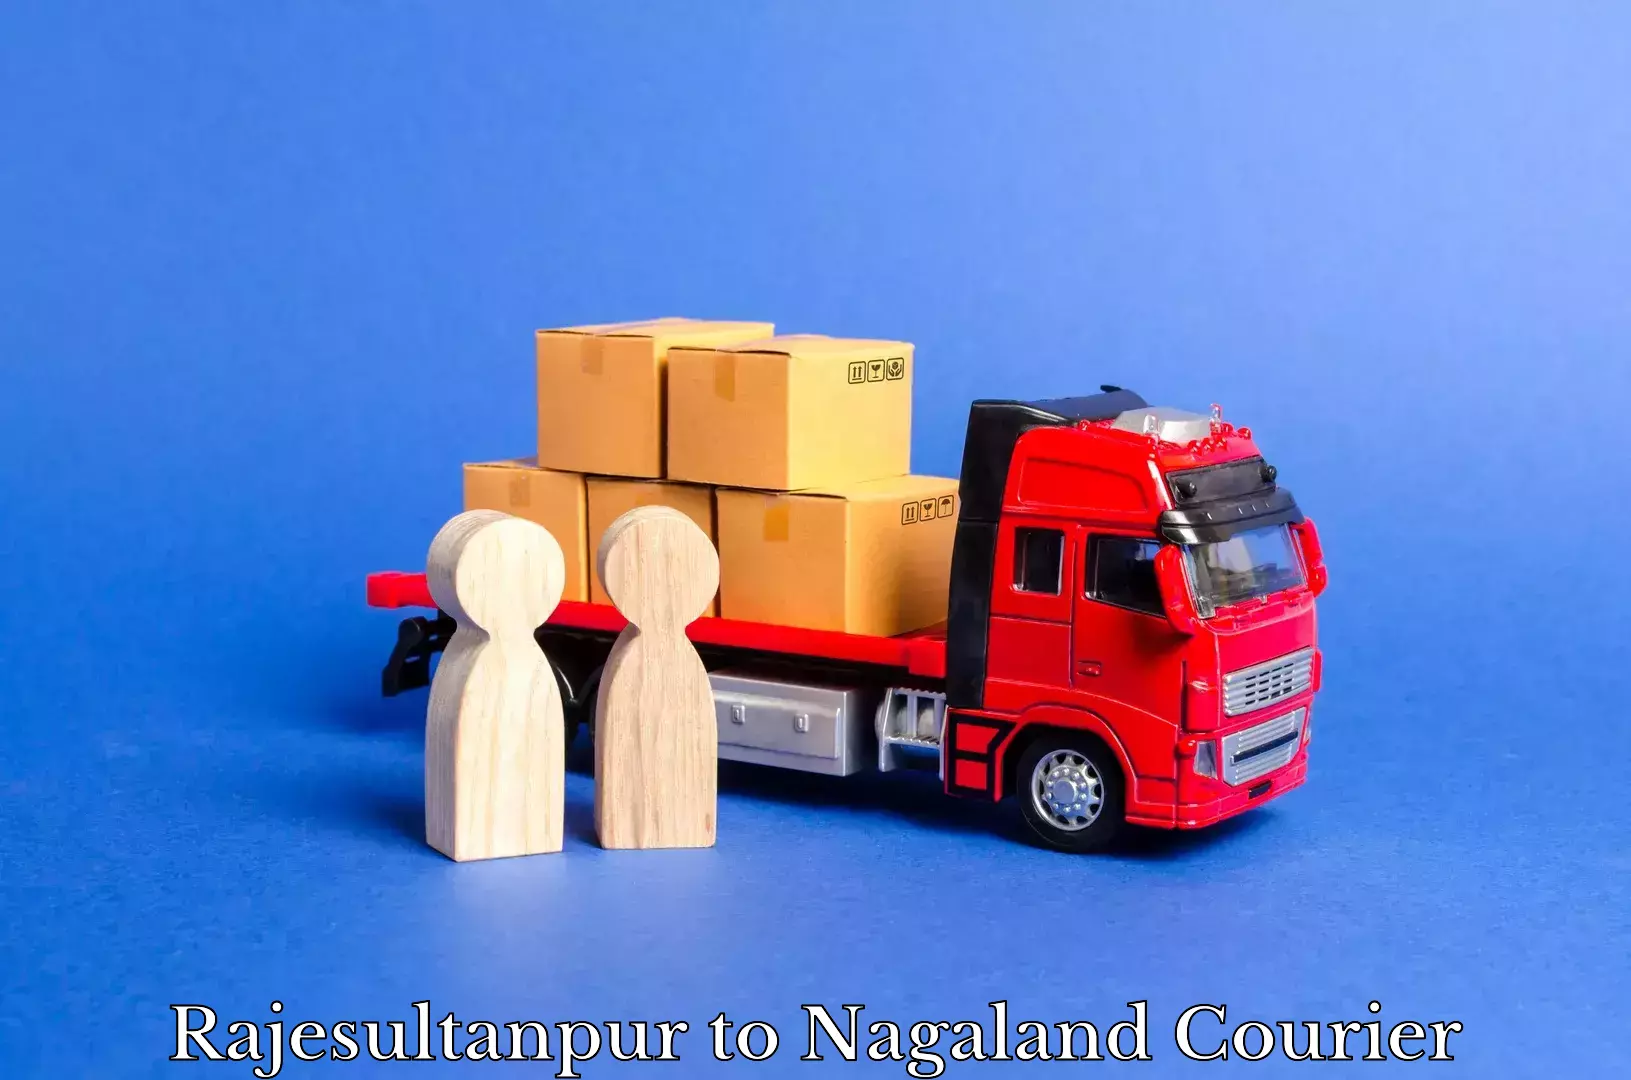 Tailored shipping services Rajesultanpur to Nagaland